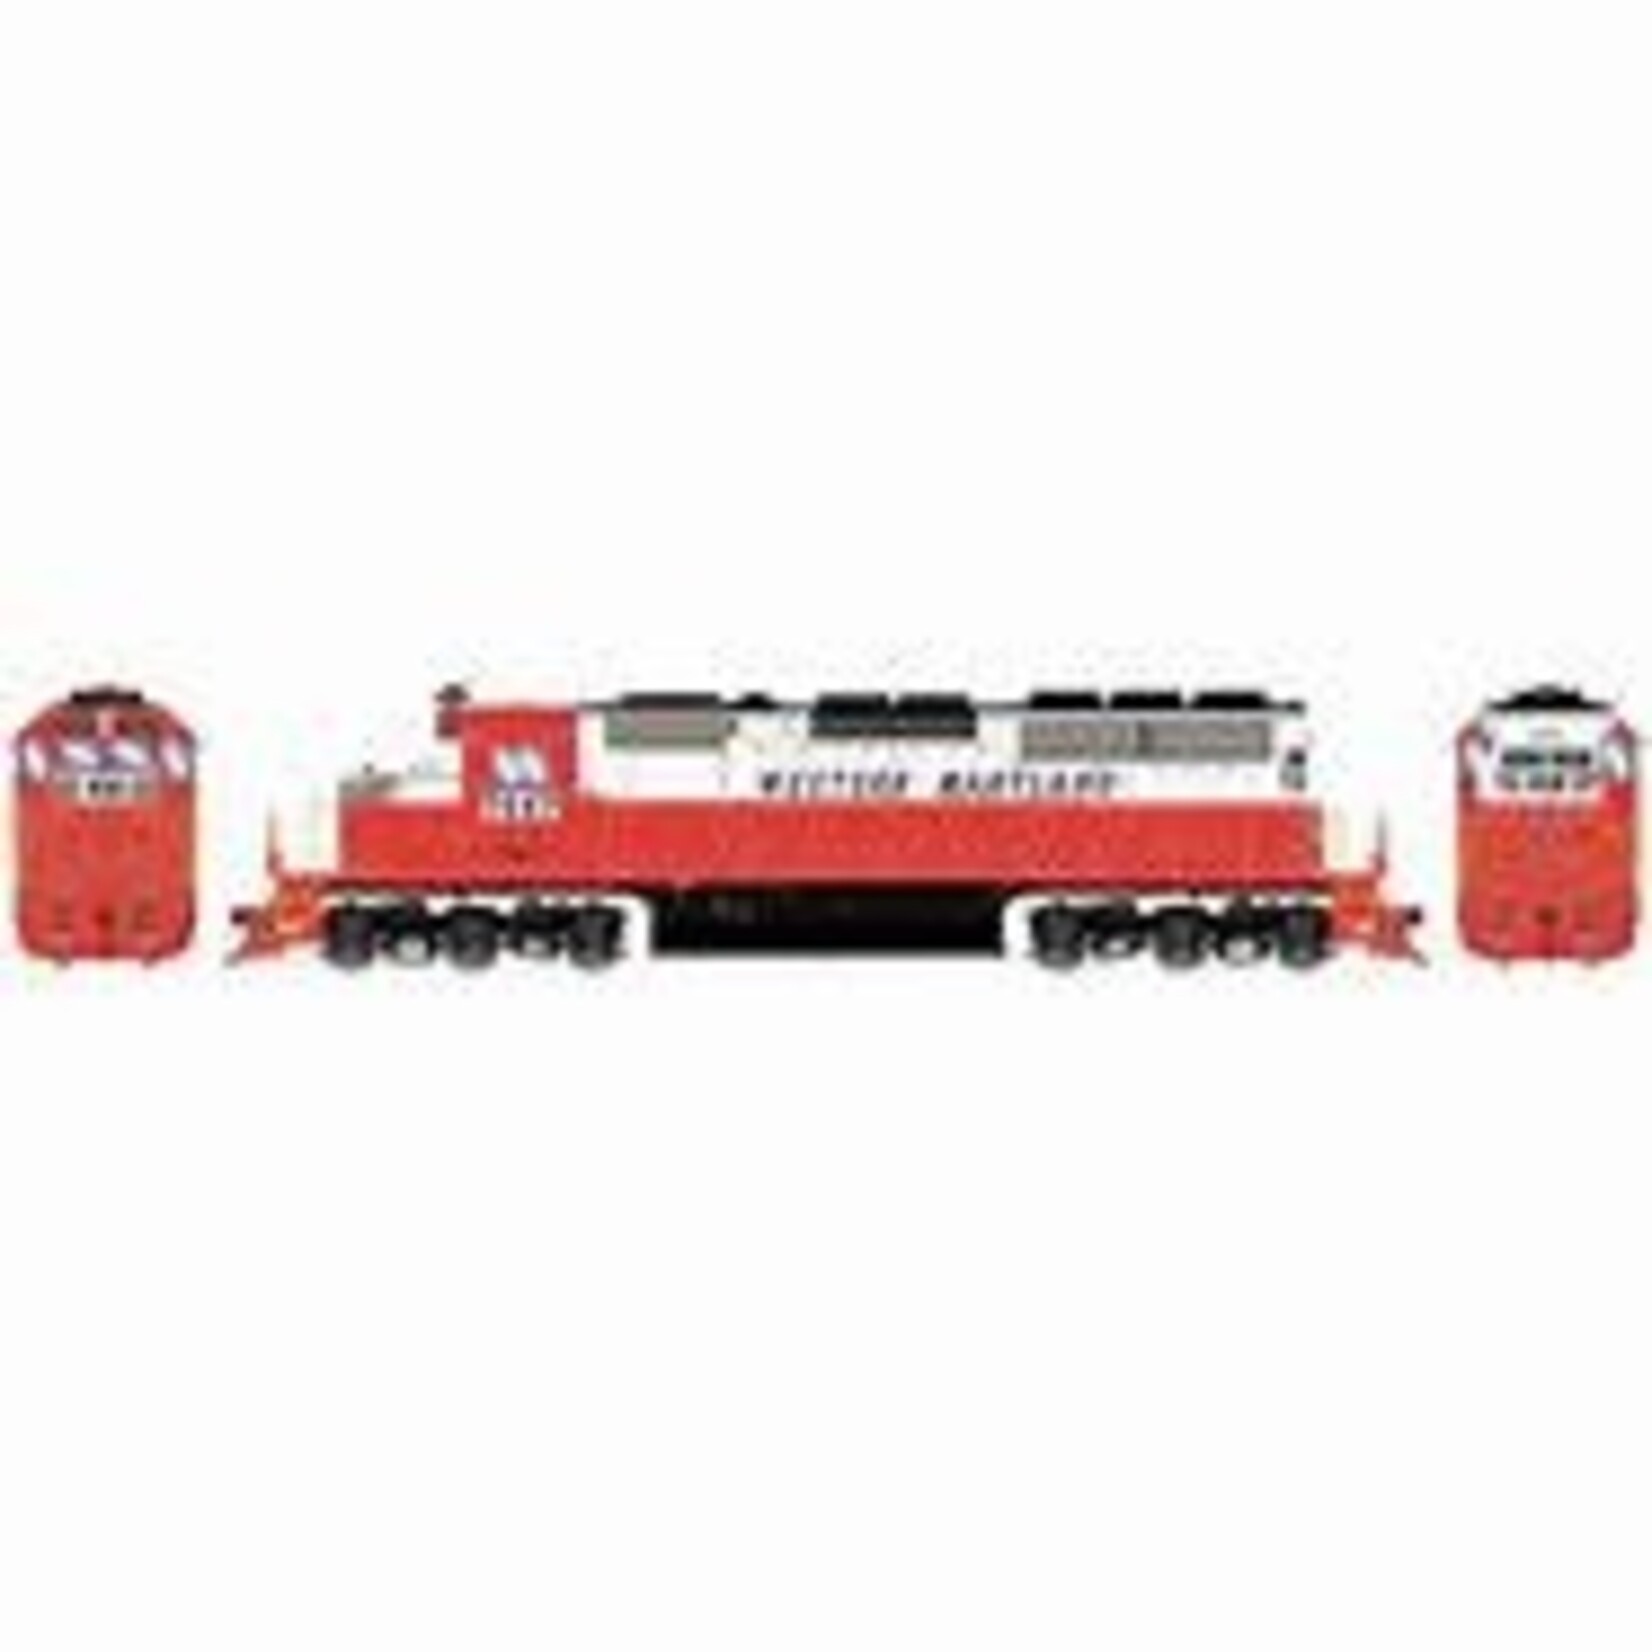 Athearn HO SD40 Locomotive with DCC & Sound, Western Maryland #7447